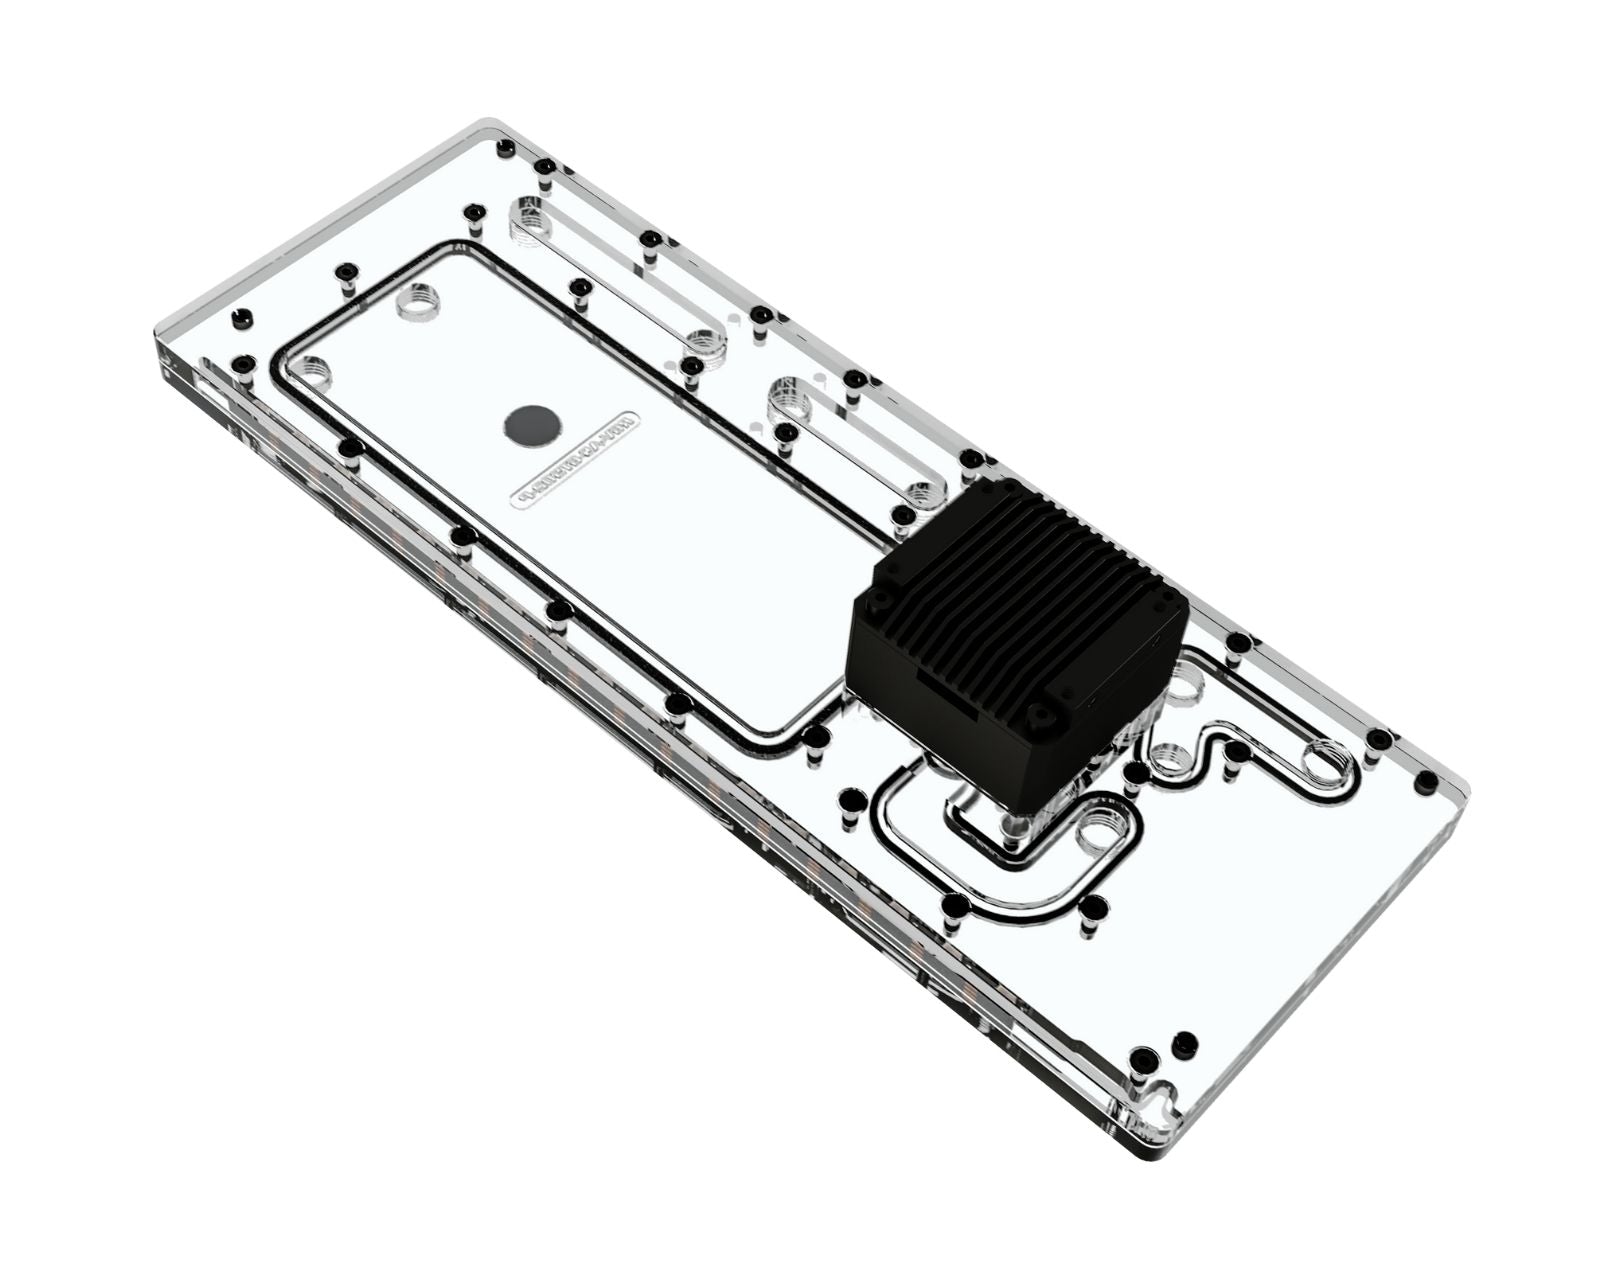 Bykski Acrylic Distro Plate /Board Cooler Solution for ASUS ROG